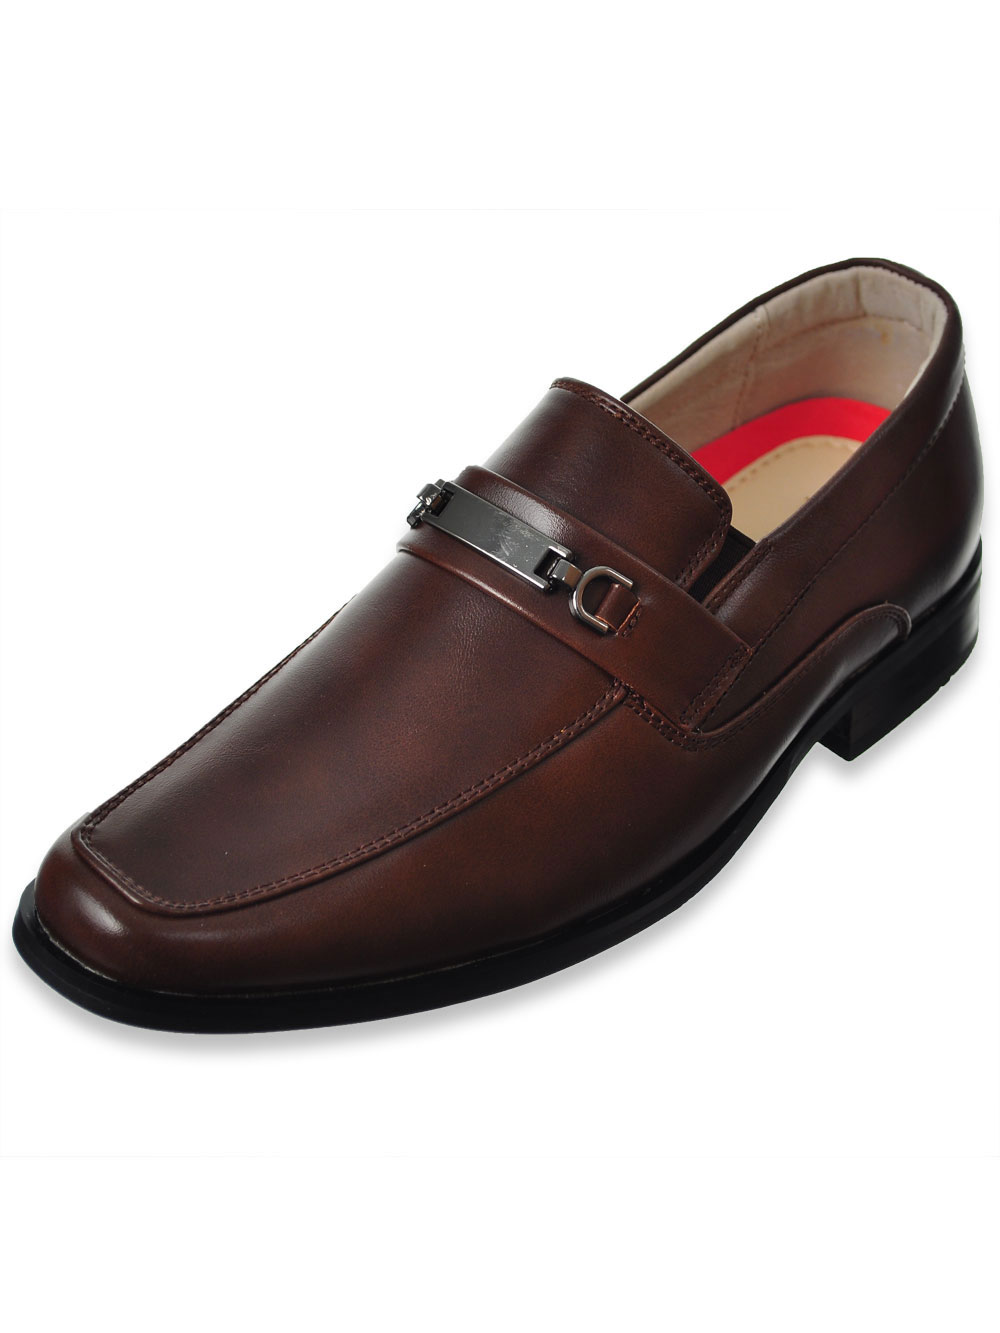 Boys' Loafers